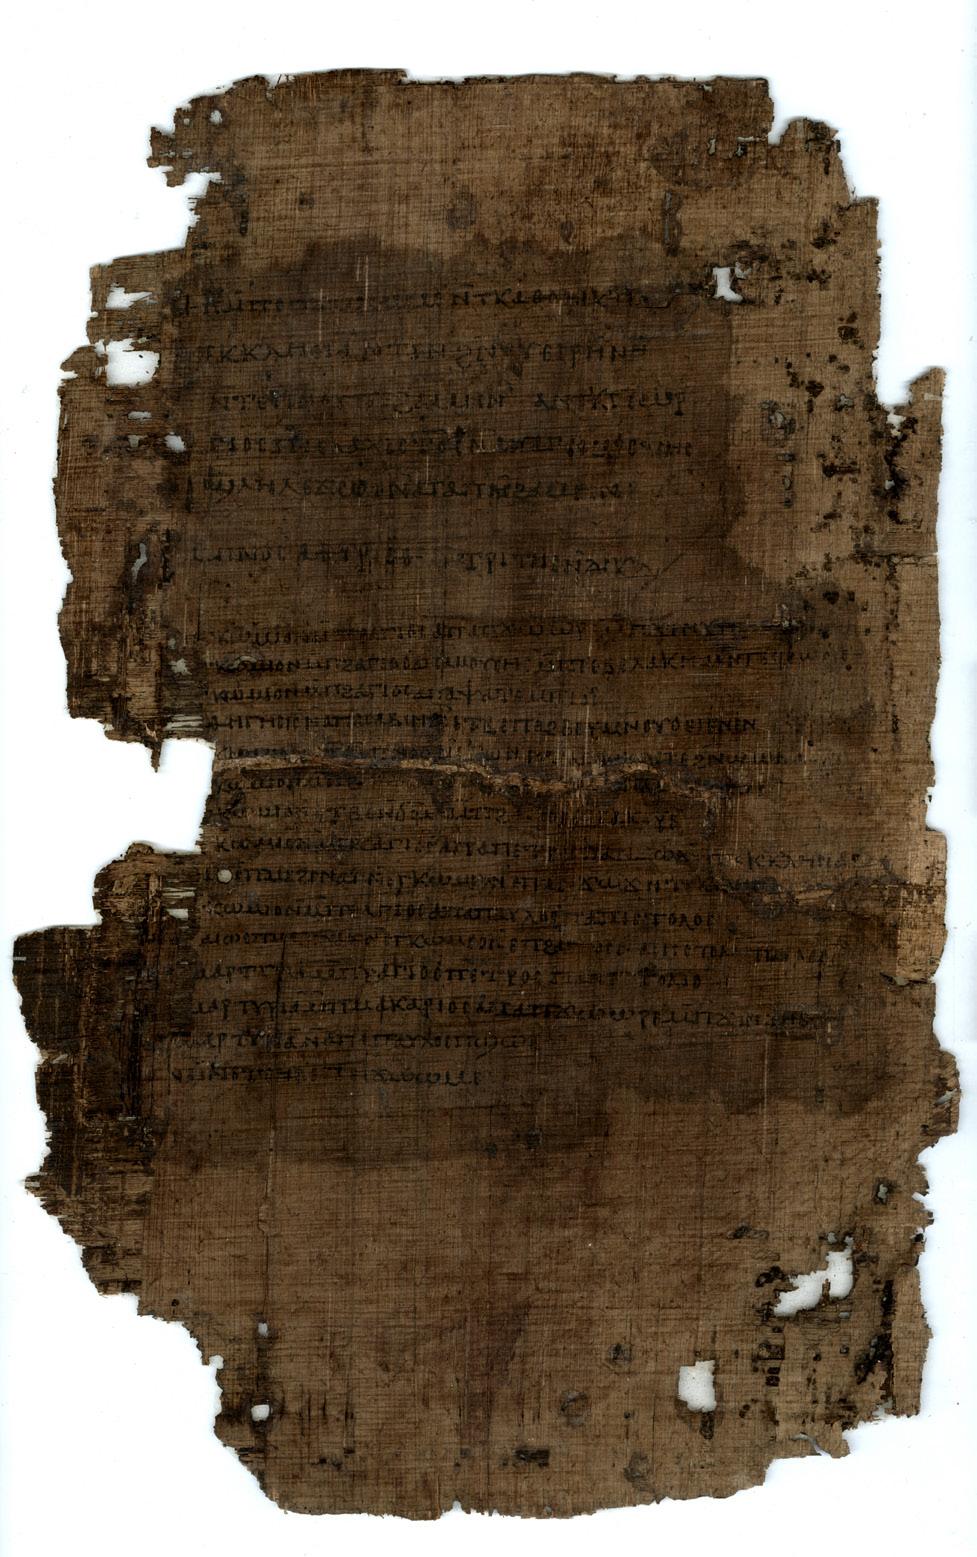 was beseeching heavenly release. Eugène Revillout, the first scholar to deal with the document, informs us that it was originally en tête de la masse from which Codex III was recovered.